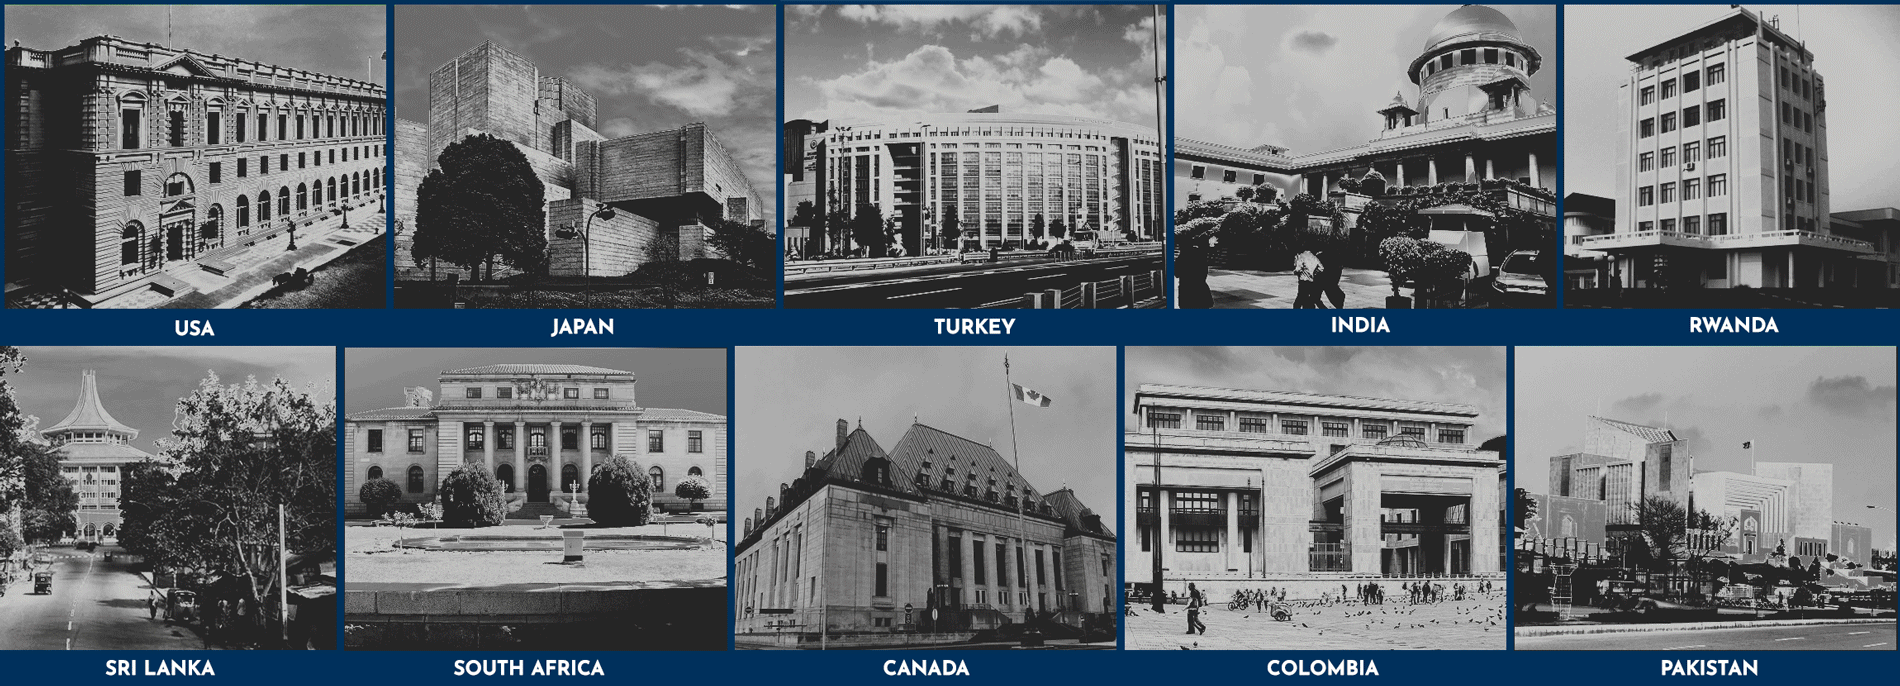 Collage of courthouses from San Francisco, Japan, Turkey, Rwanda, Sri Lanka, South Africa, Canada, Colombia, and Pakistan